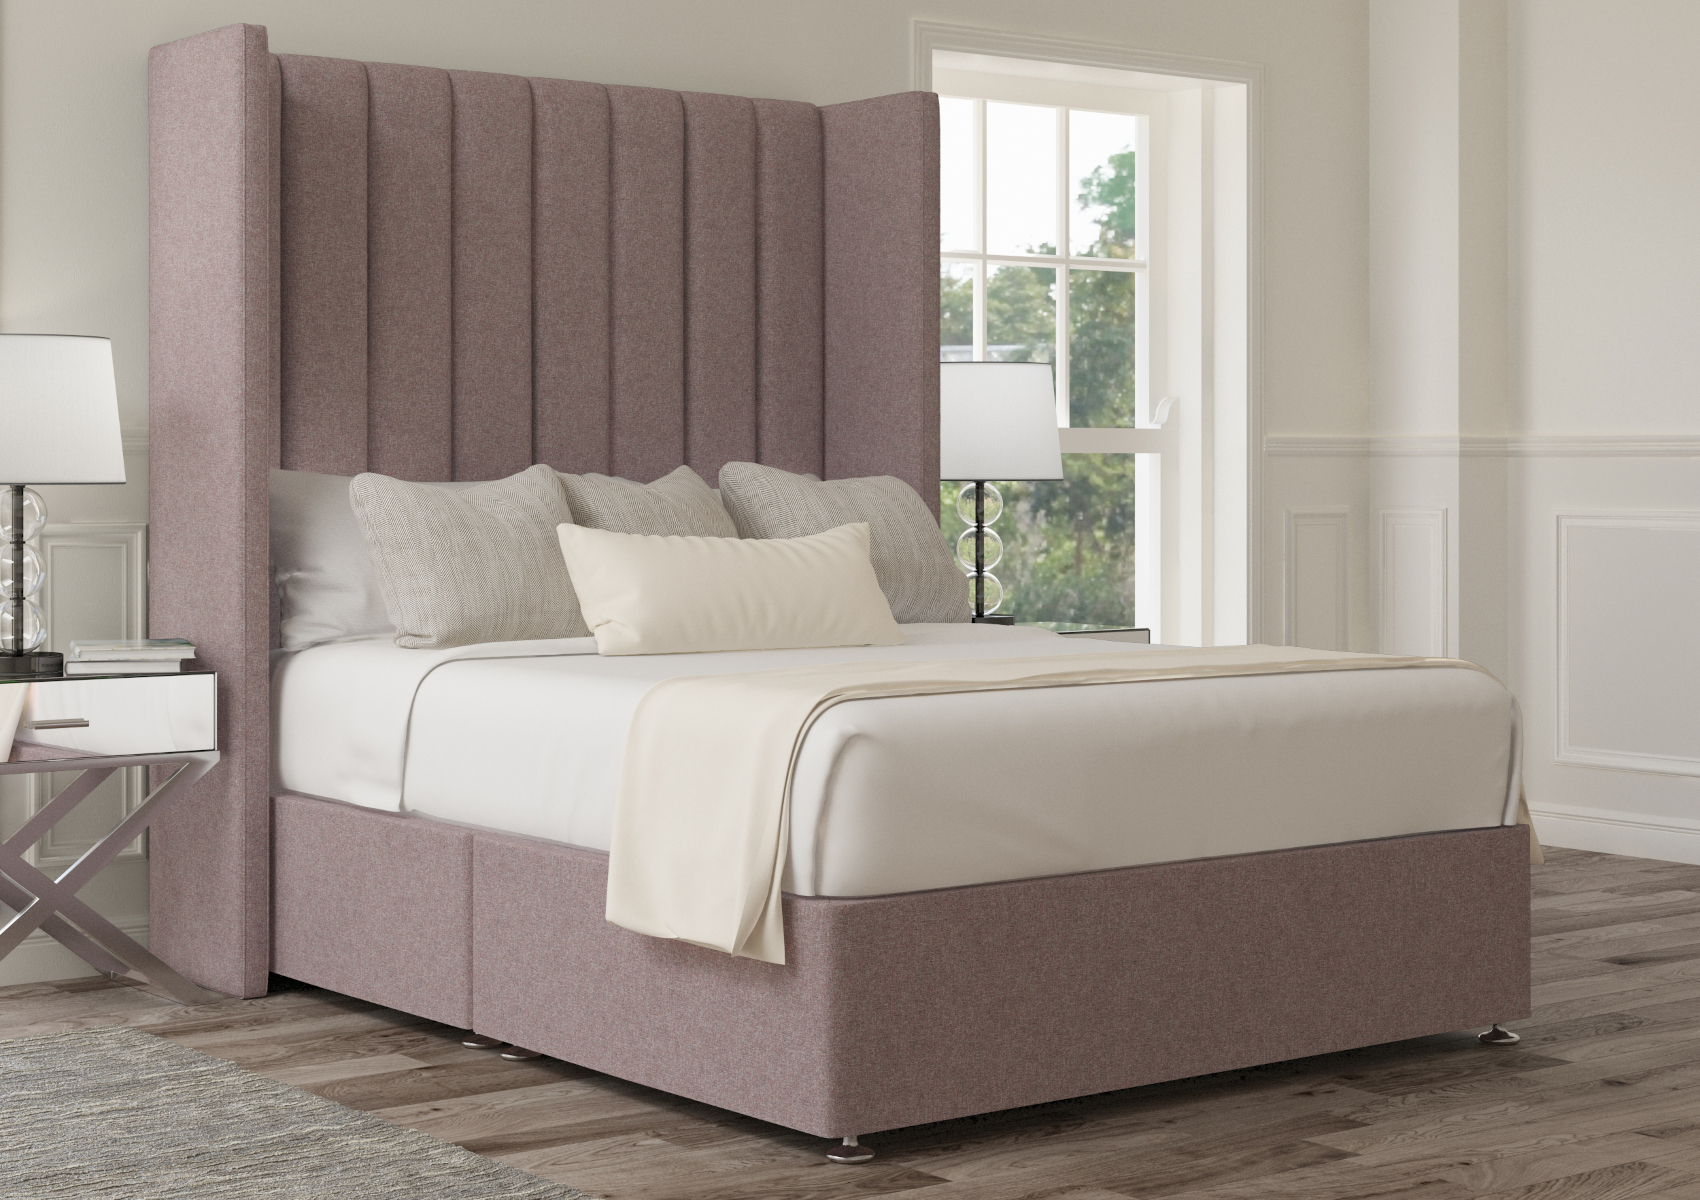 View Lola Trebla Flax Upholstered Double Winged Bed Time4Sleep information